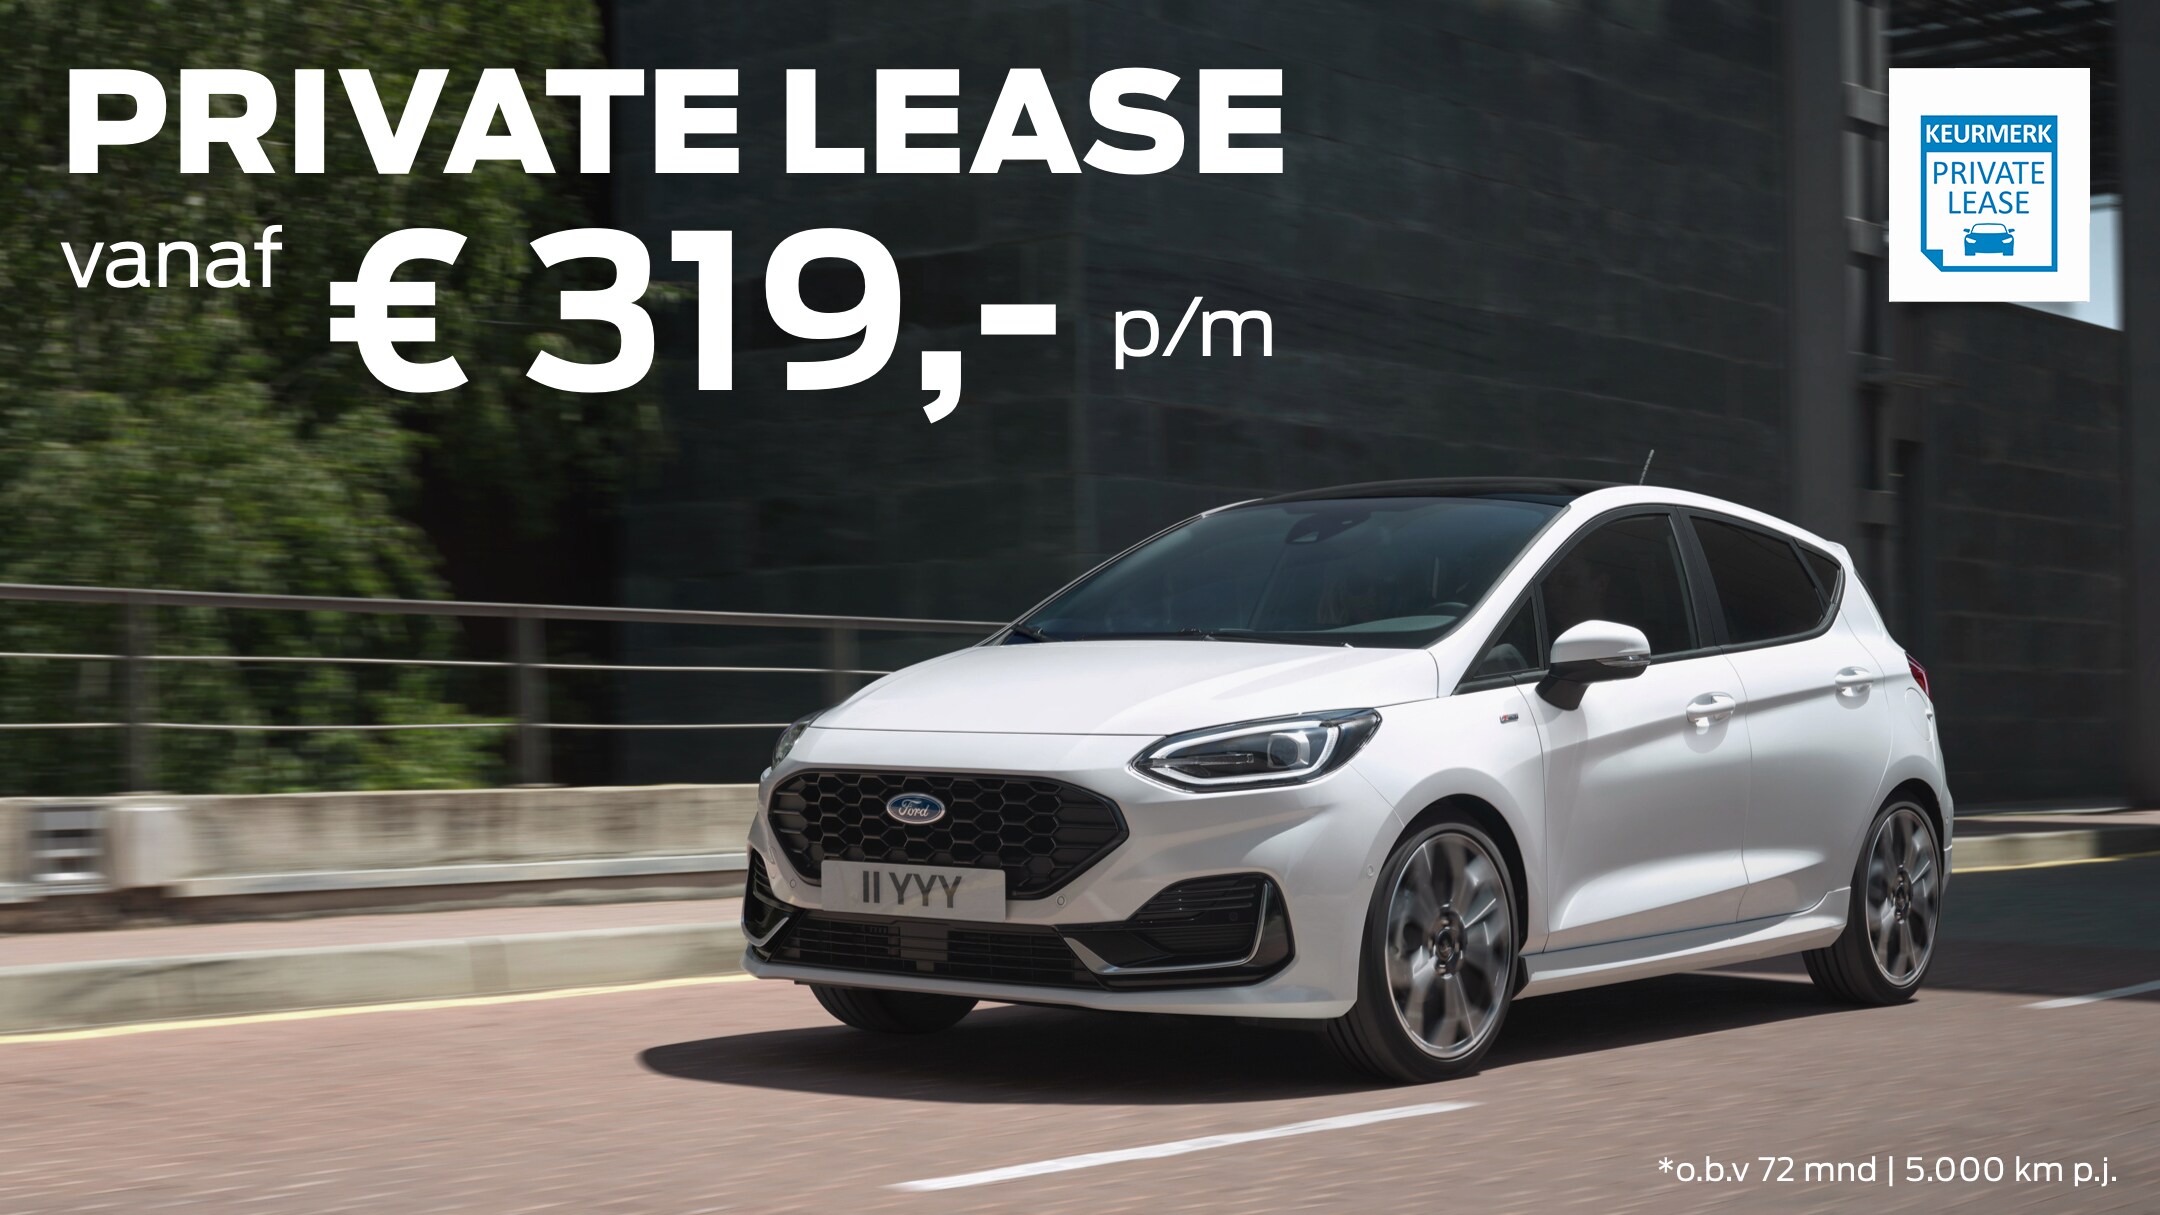 Red Ford Fiesta Lease Offer promo visual